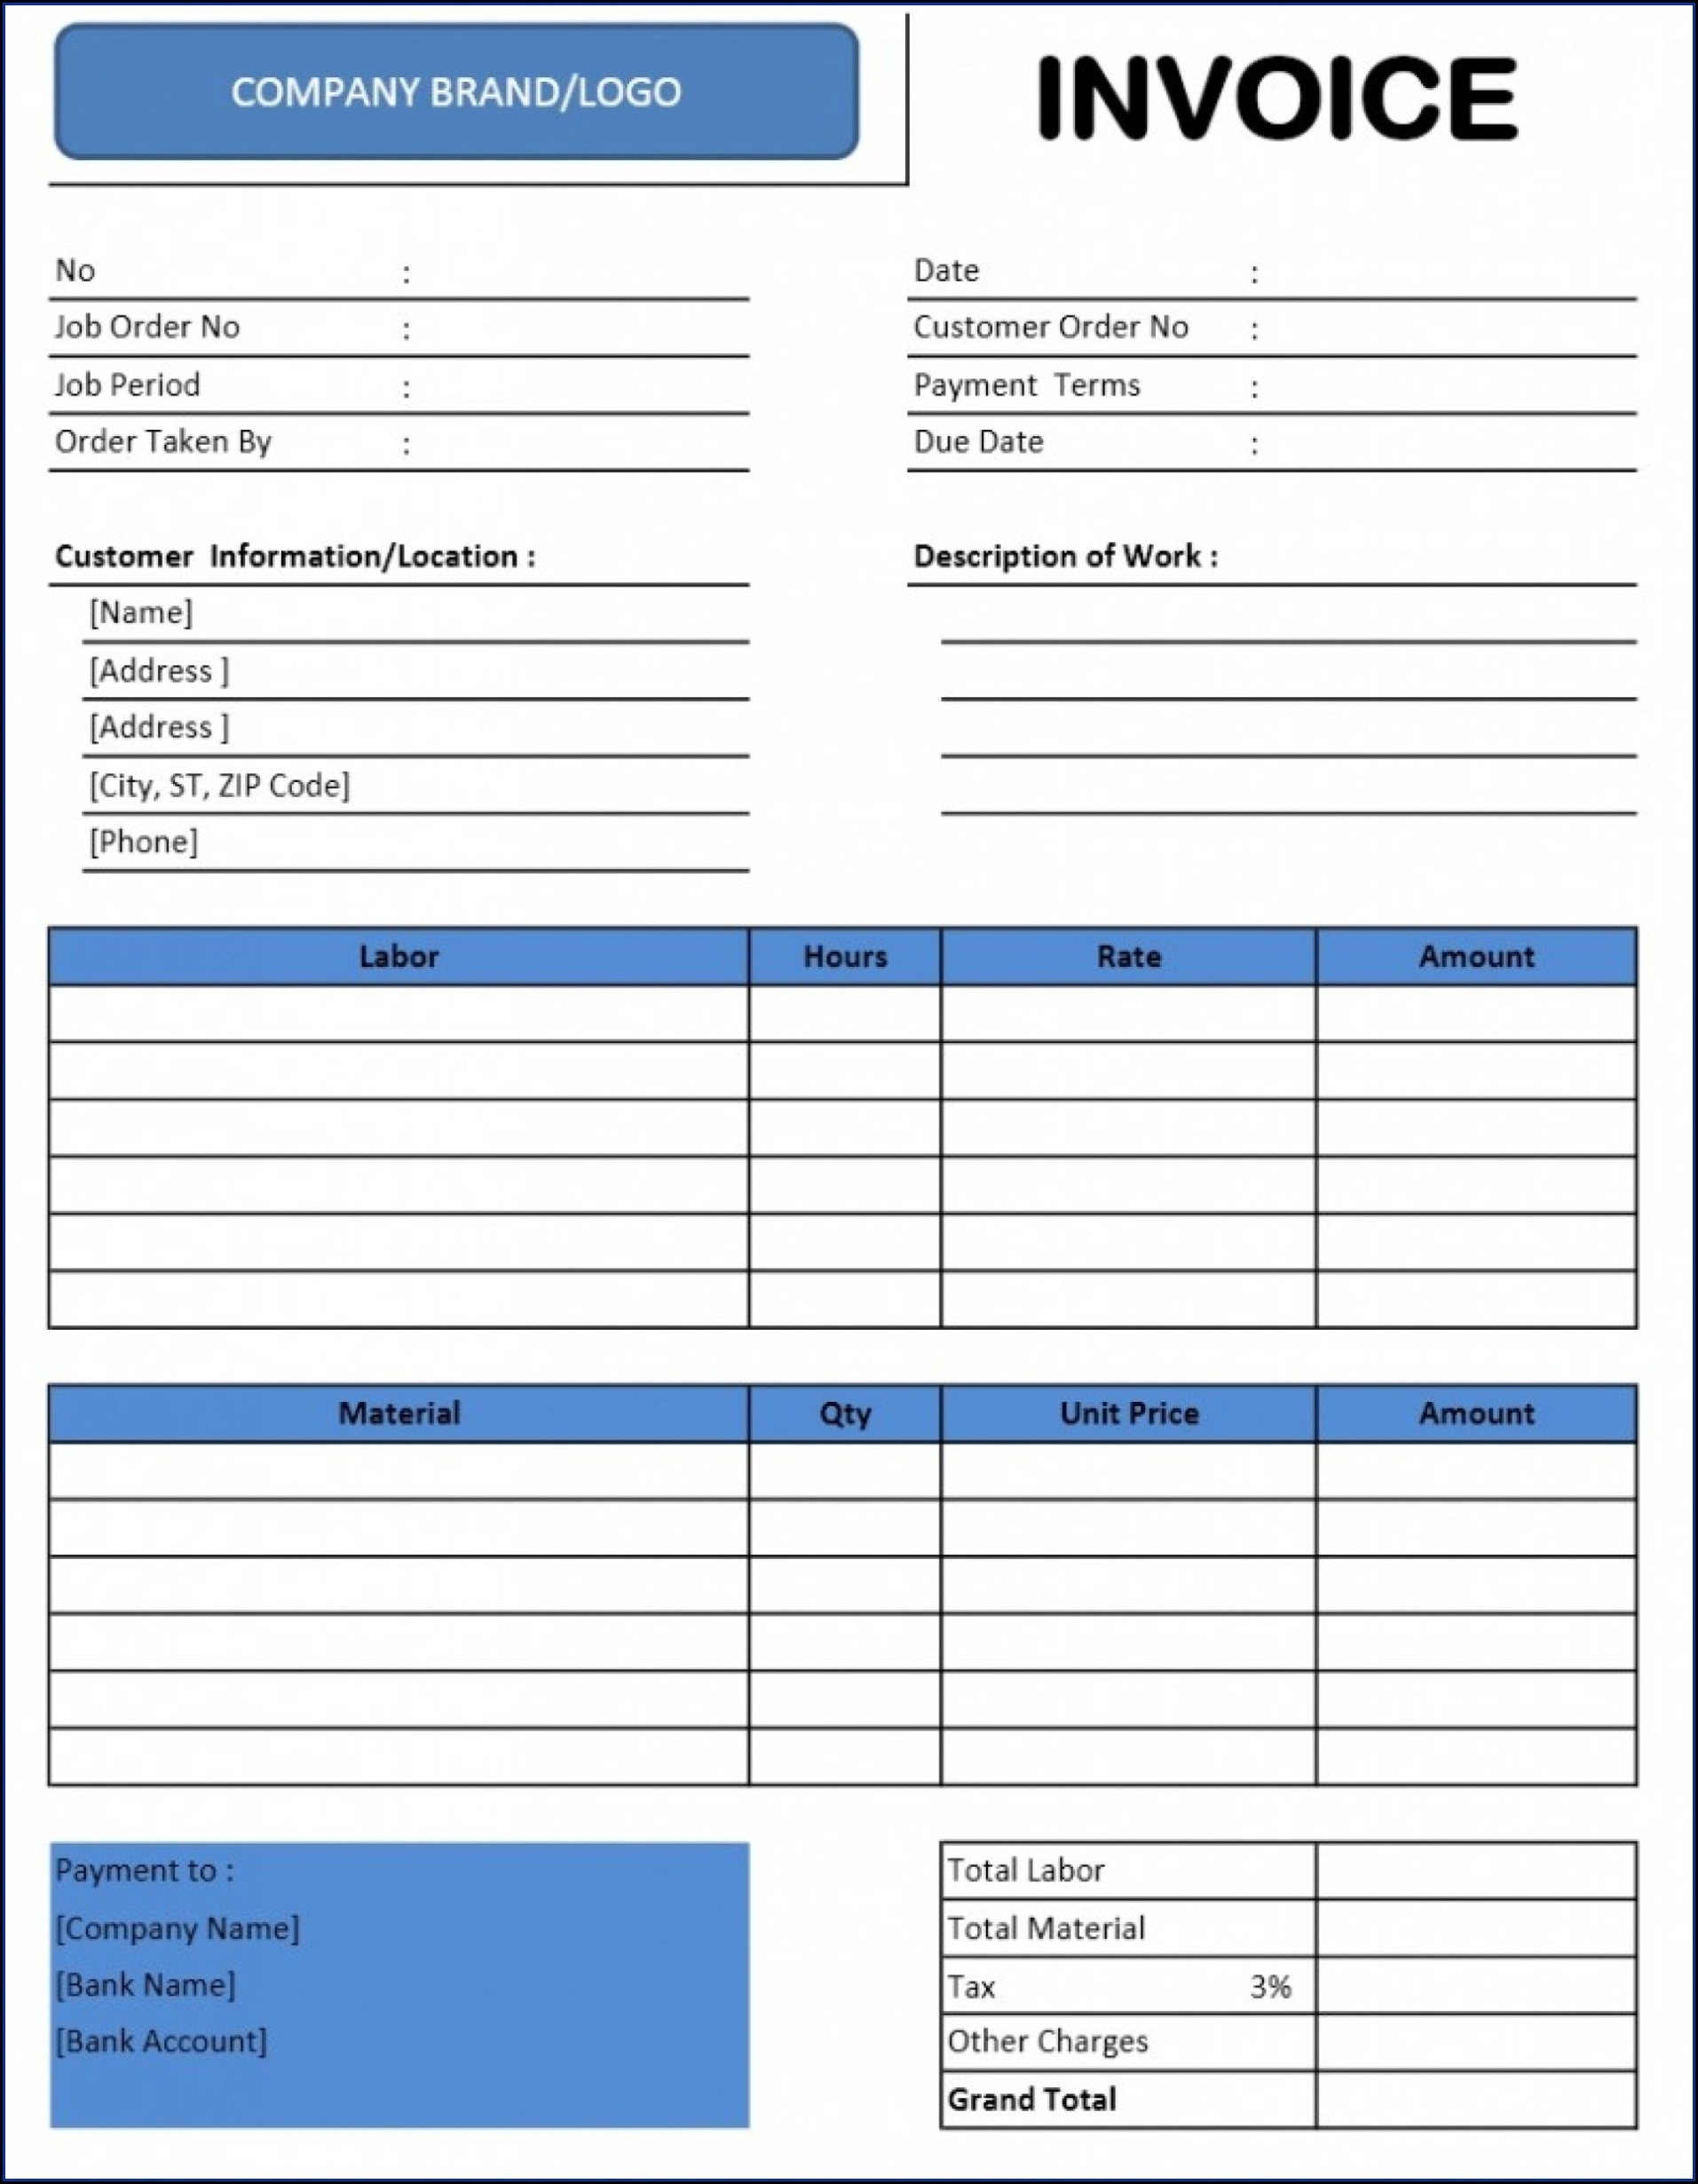 Libreoffice Excel Invoice Template – Template 1 : Resume Examples #6V3Rdmr17B Intended For Libreoffice Invoice Template